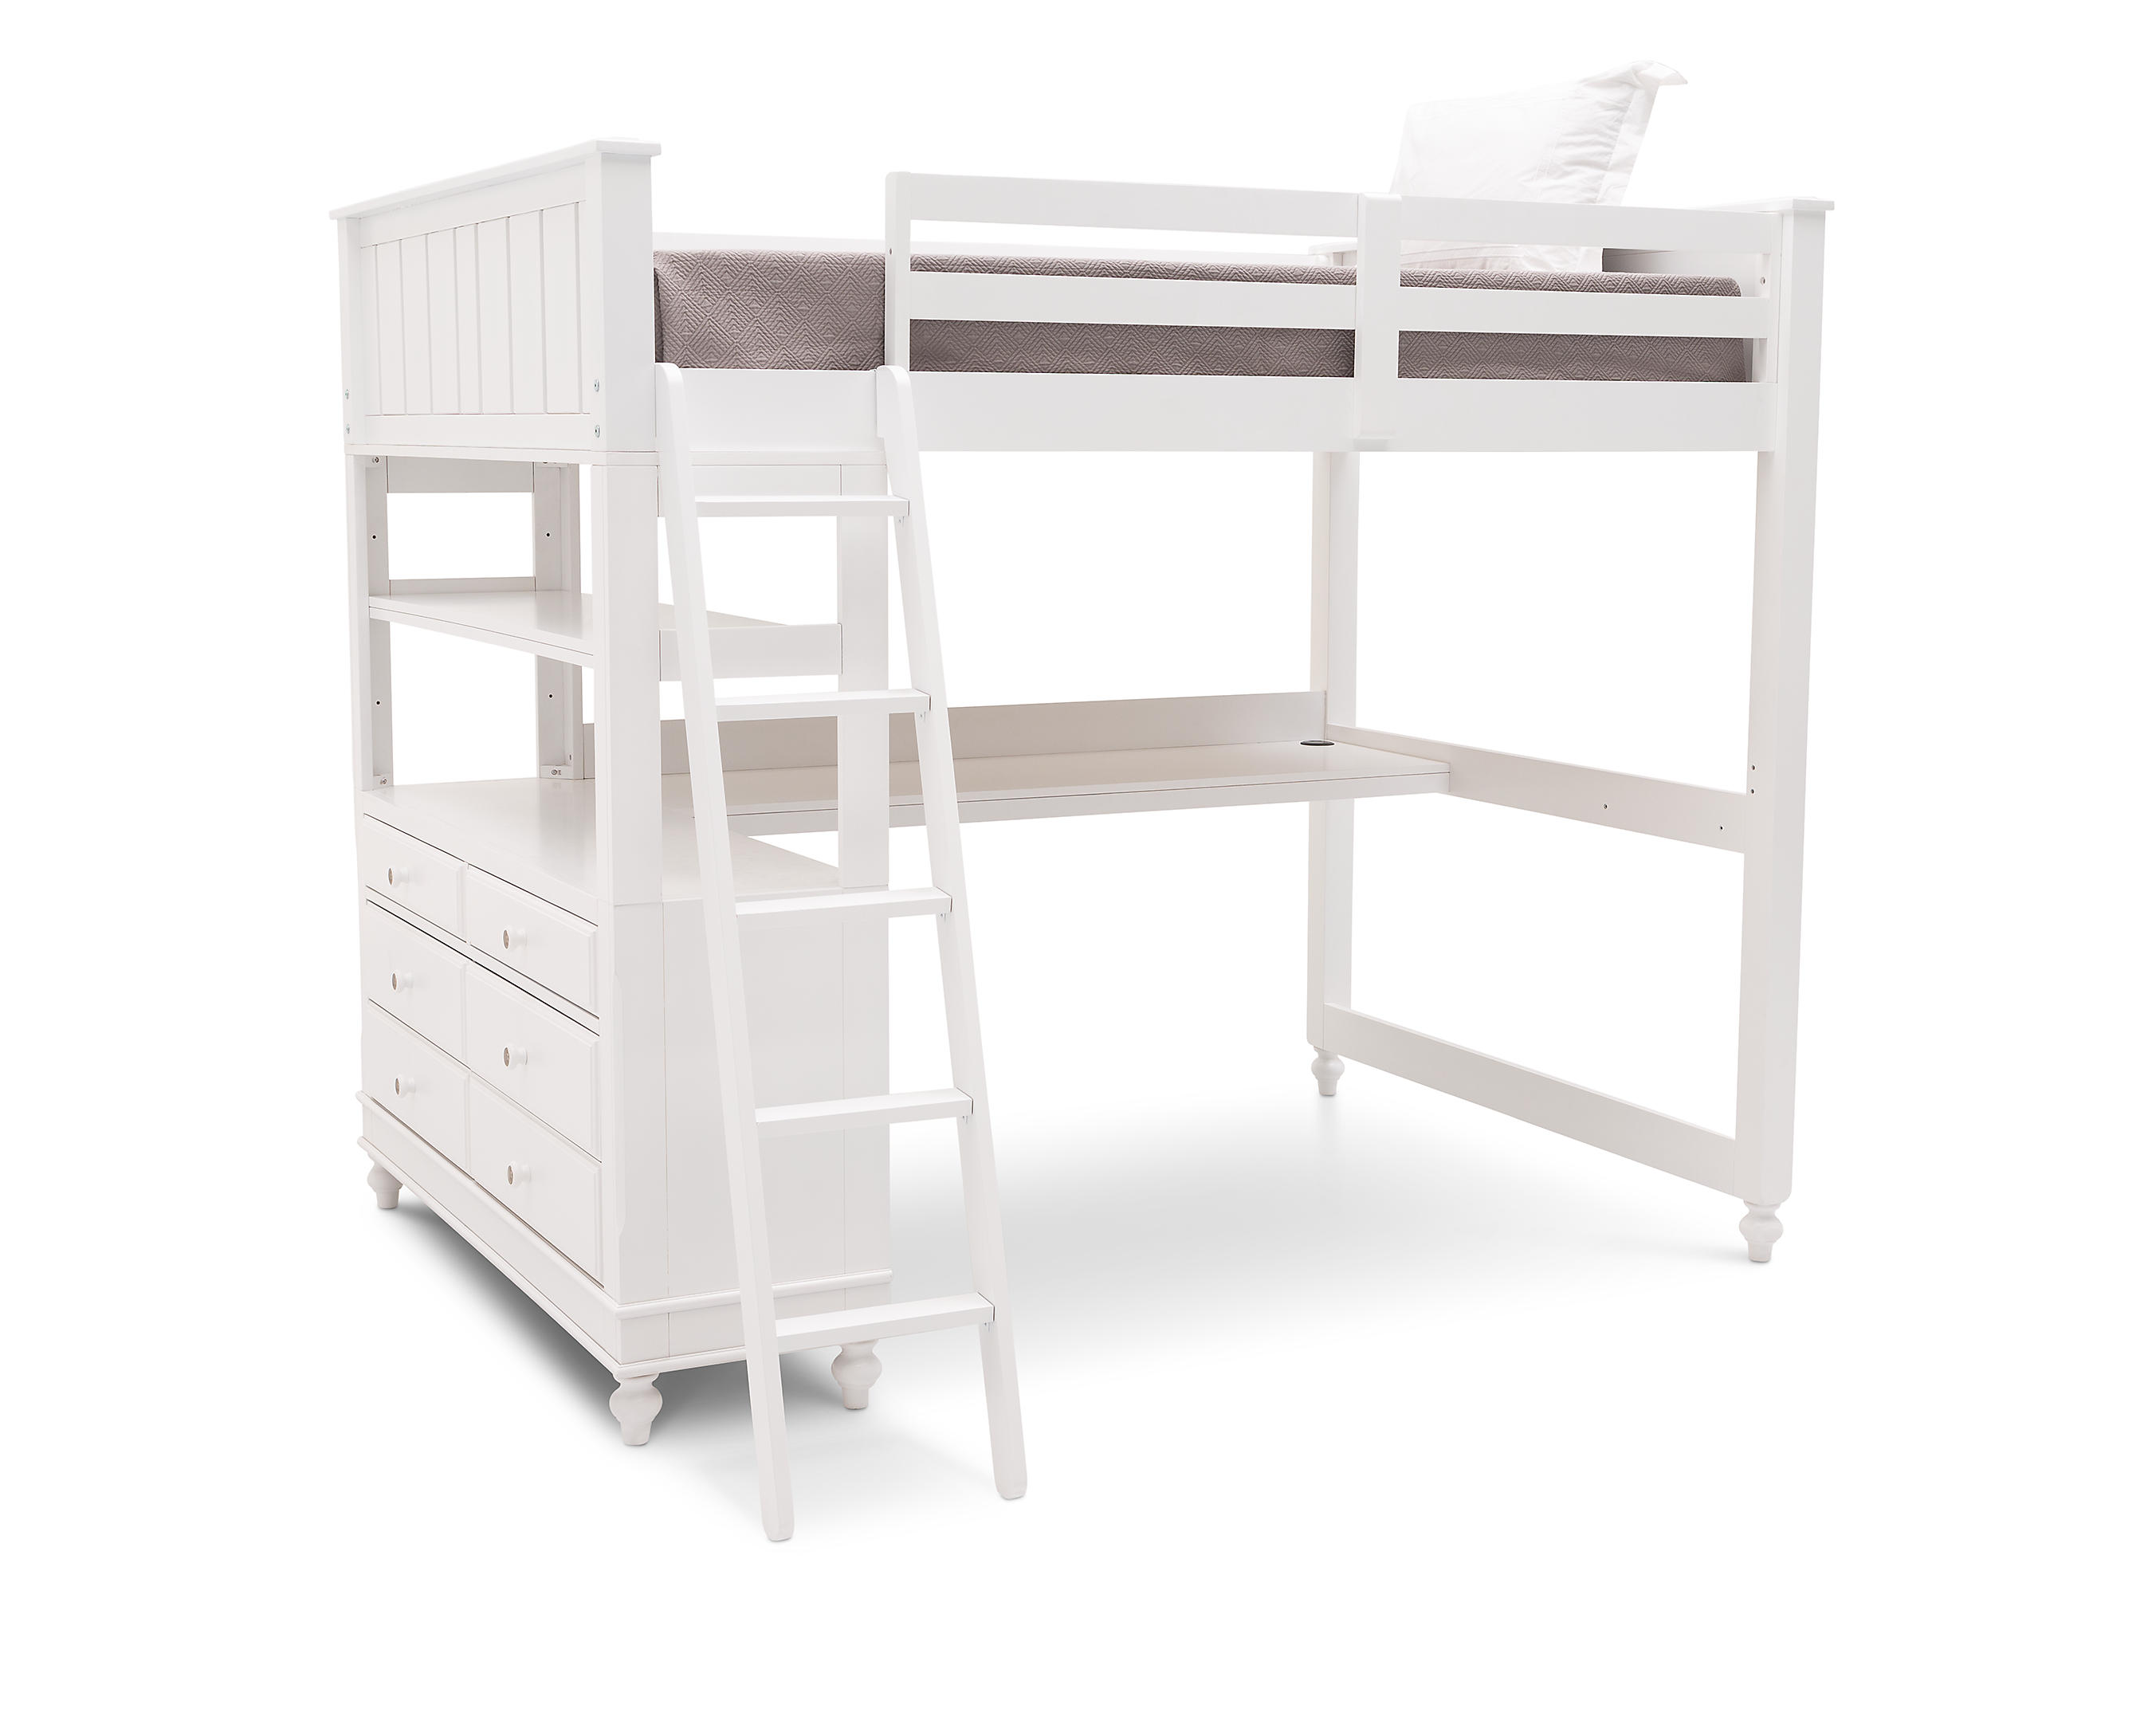 Lake House Loft Bed With Desk, Furniture Row Bunk Beds